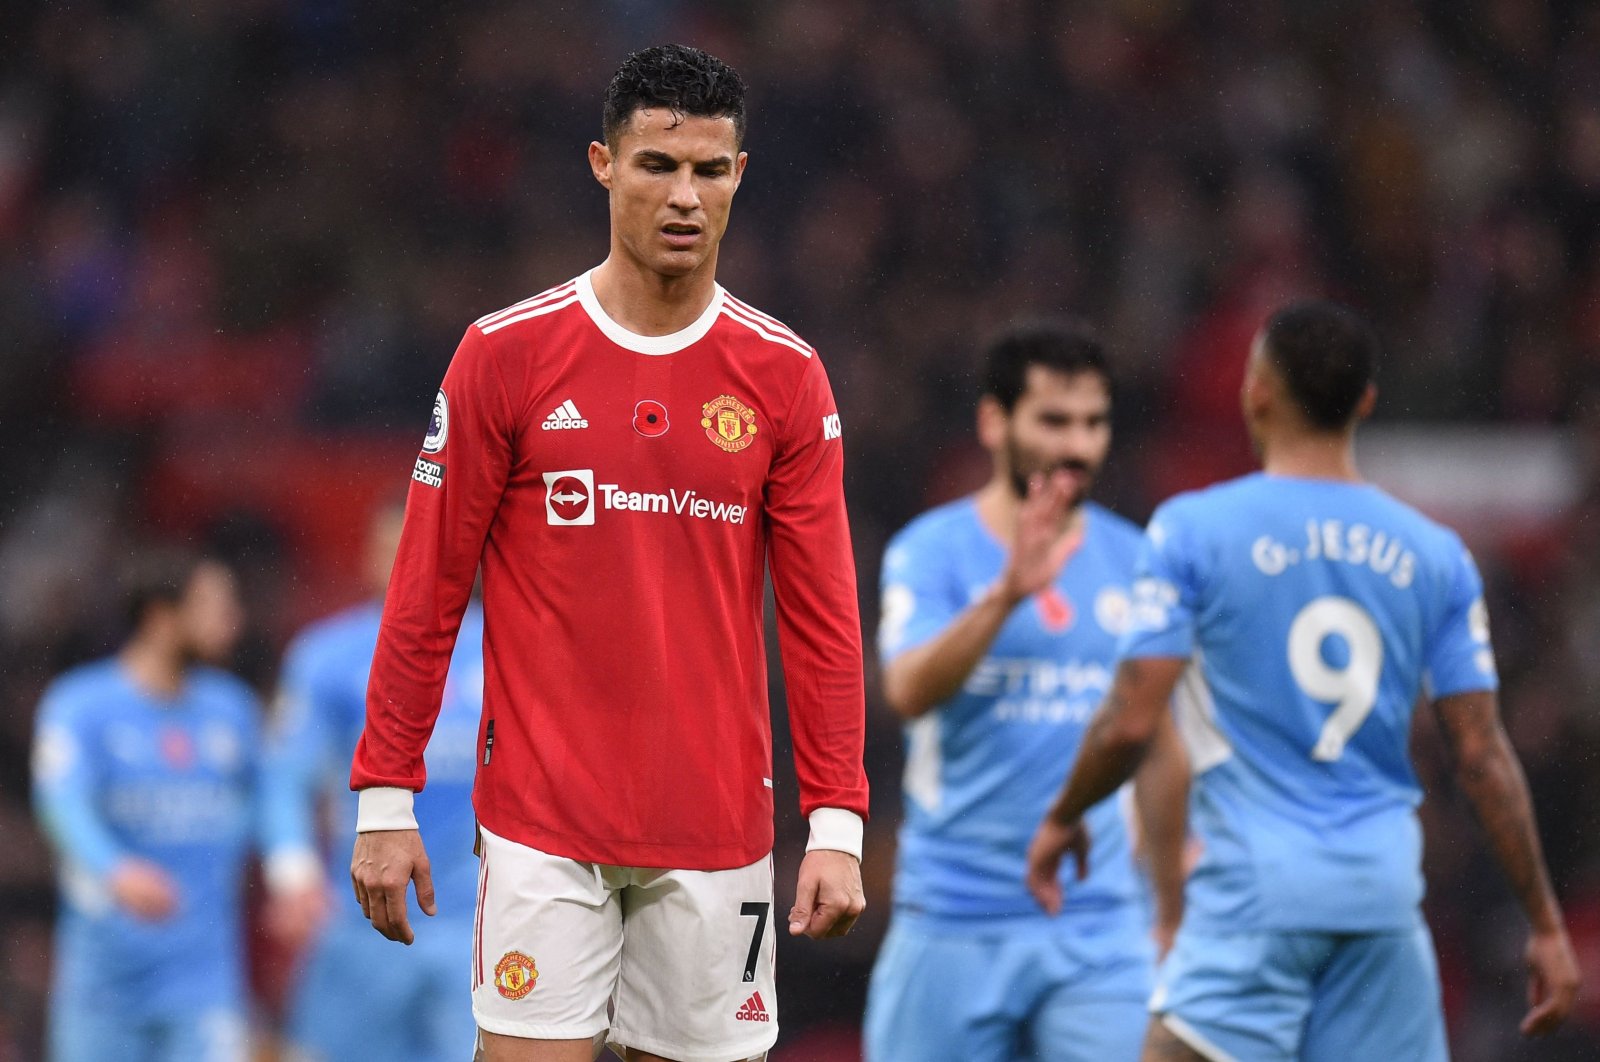 Manchester United's Portuguese striker Cristiano Ronaldo reacts during a Premier League match against Manchester City at Old Trafford in Manchester, England, Nov. 6, 2021. (AFP Photo)